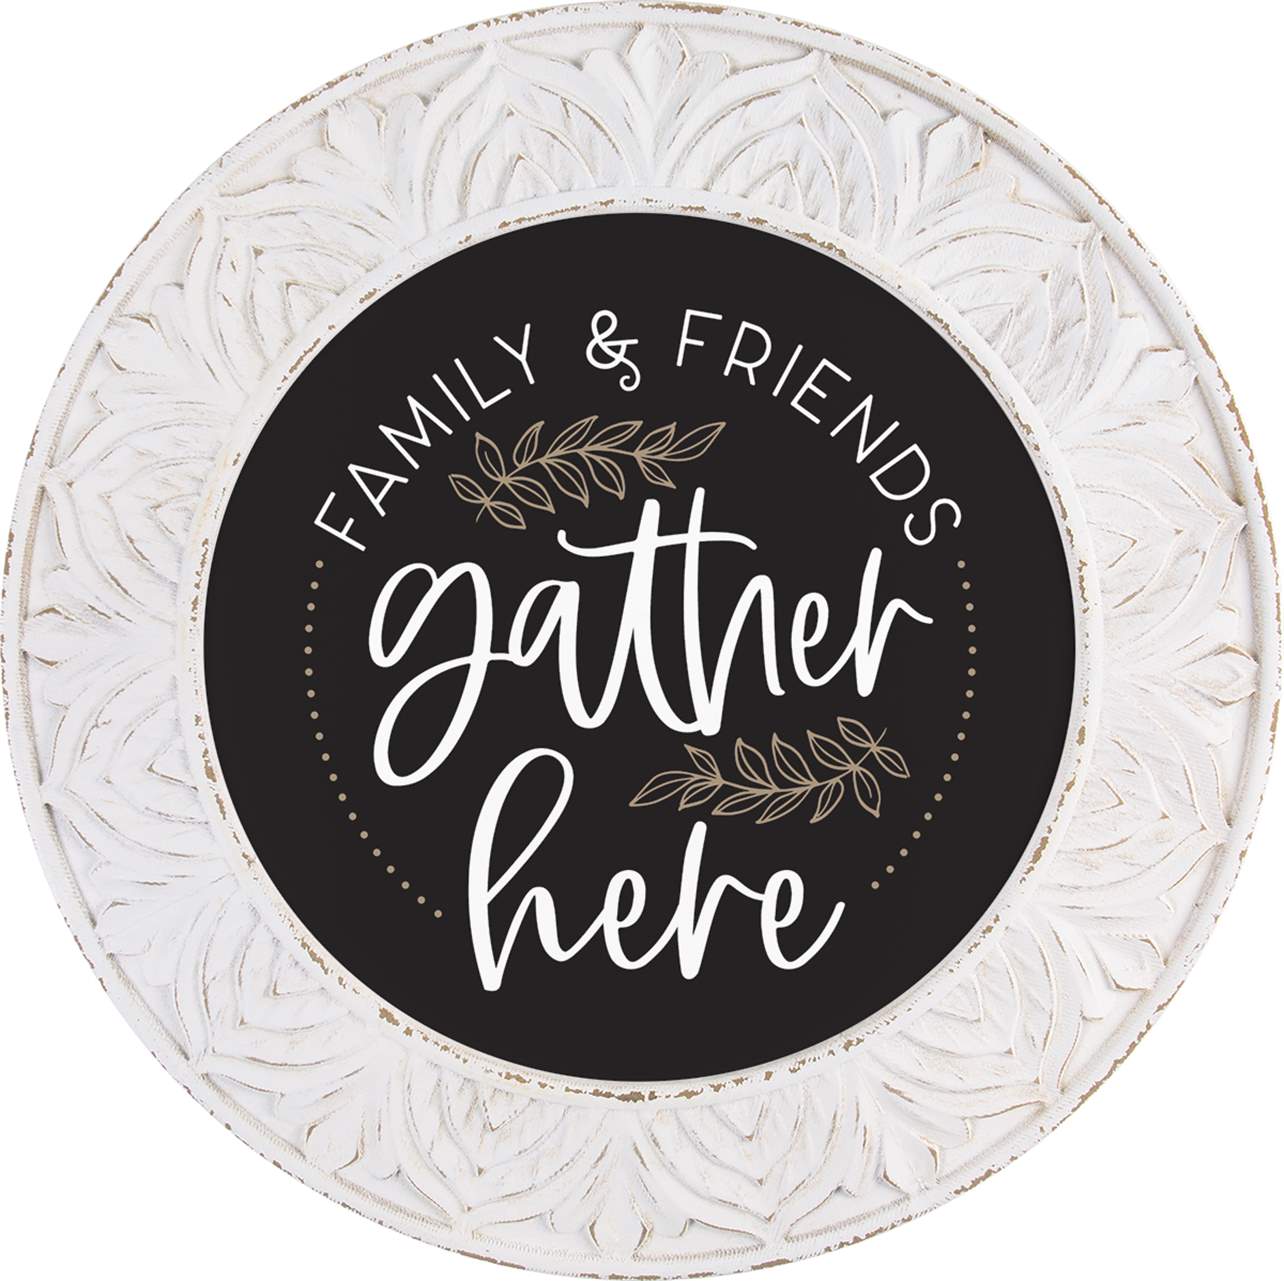 Framed Wall Art Sign "Family & Friends Gather Here"  Natural Wood 19.75" Round